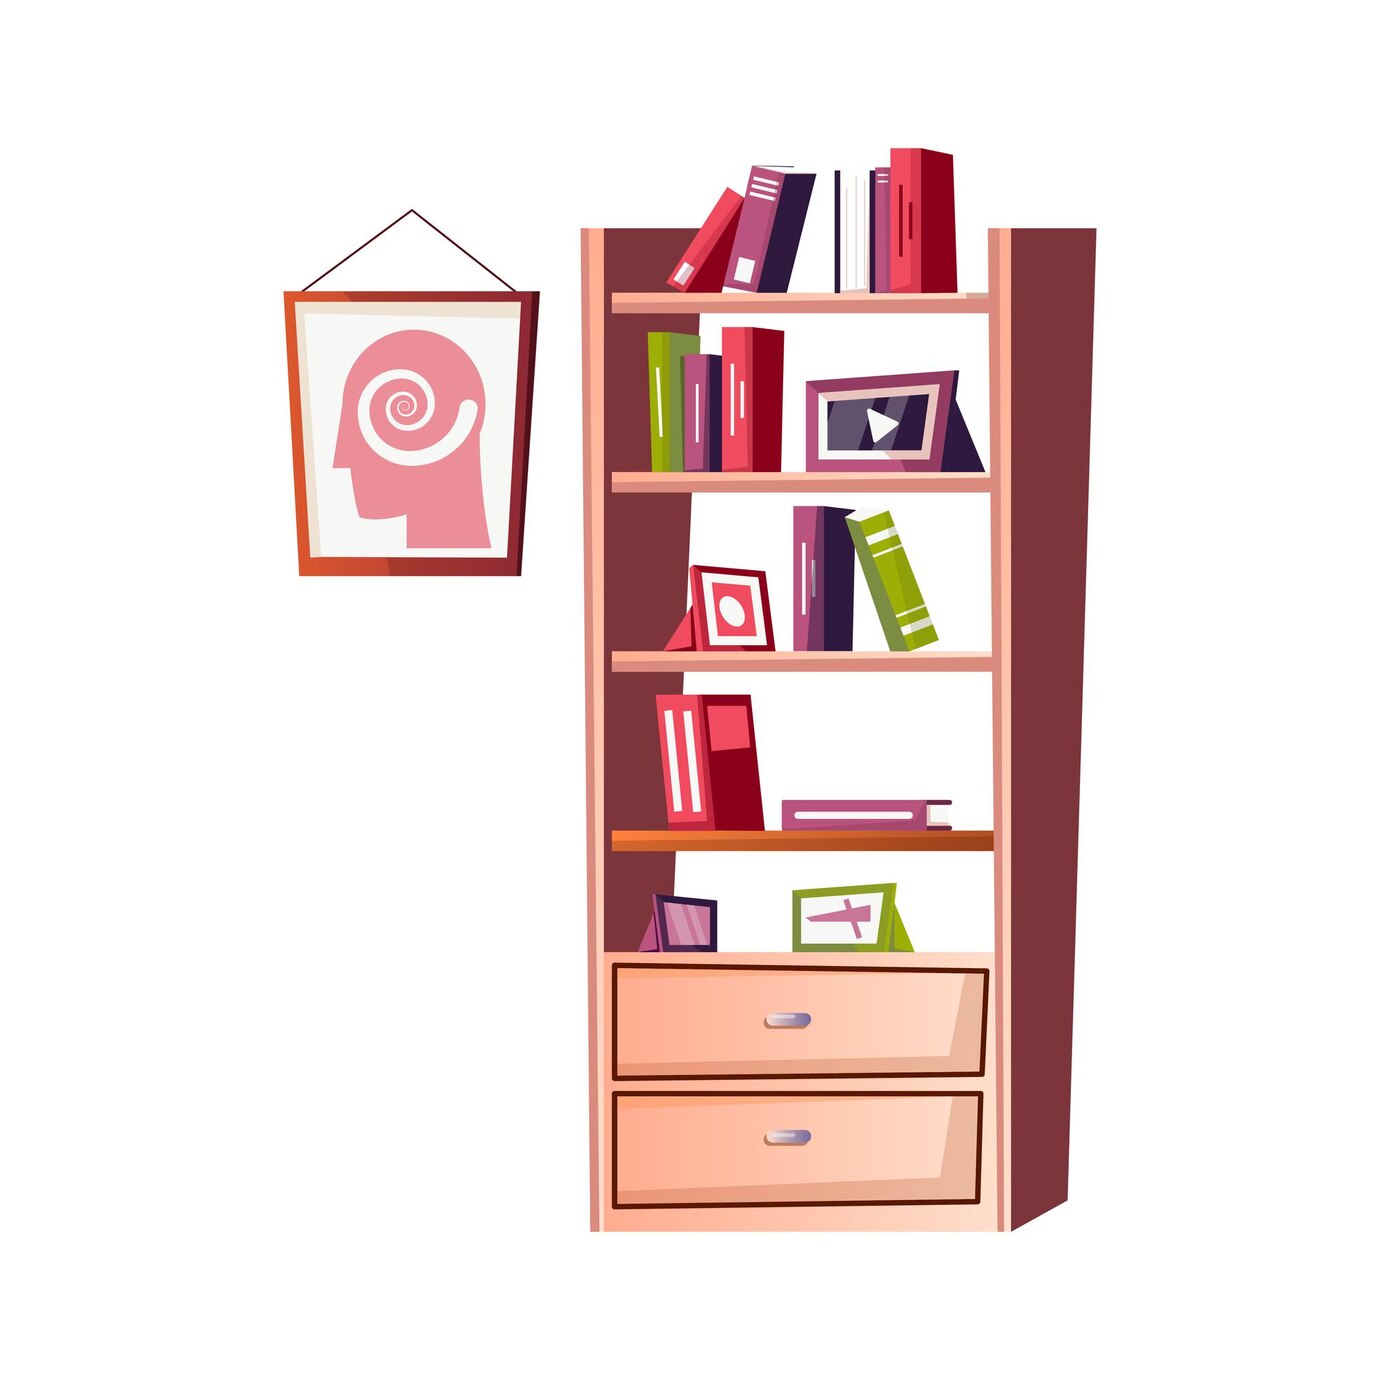 Flat Psychologist Office Interior Illustration With Bookcase Poster Wall 1284 64198